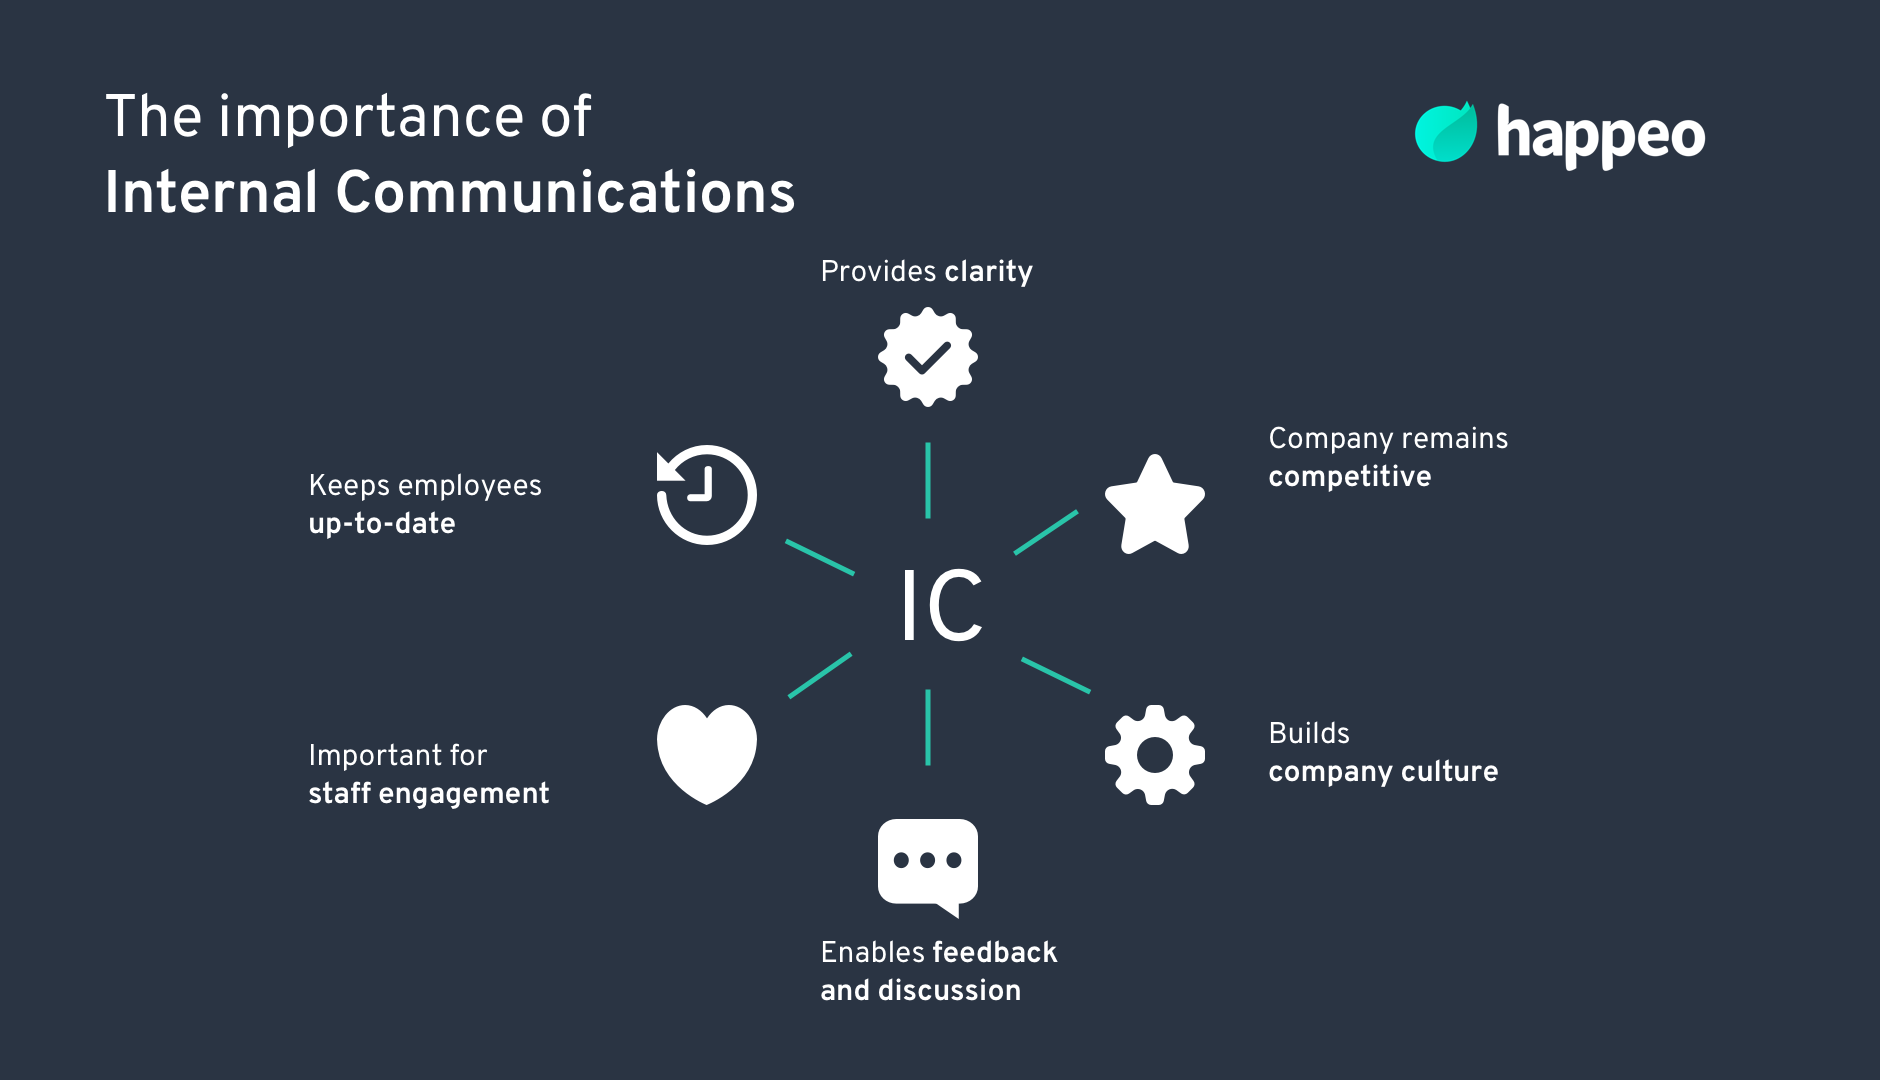 Why is internal communication important?